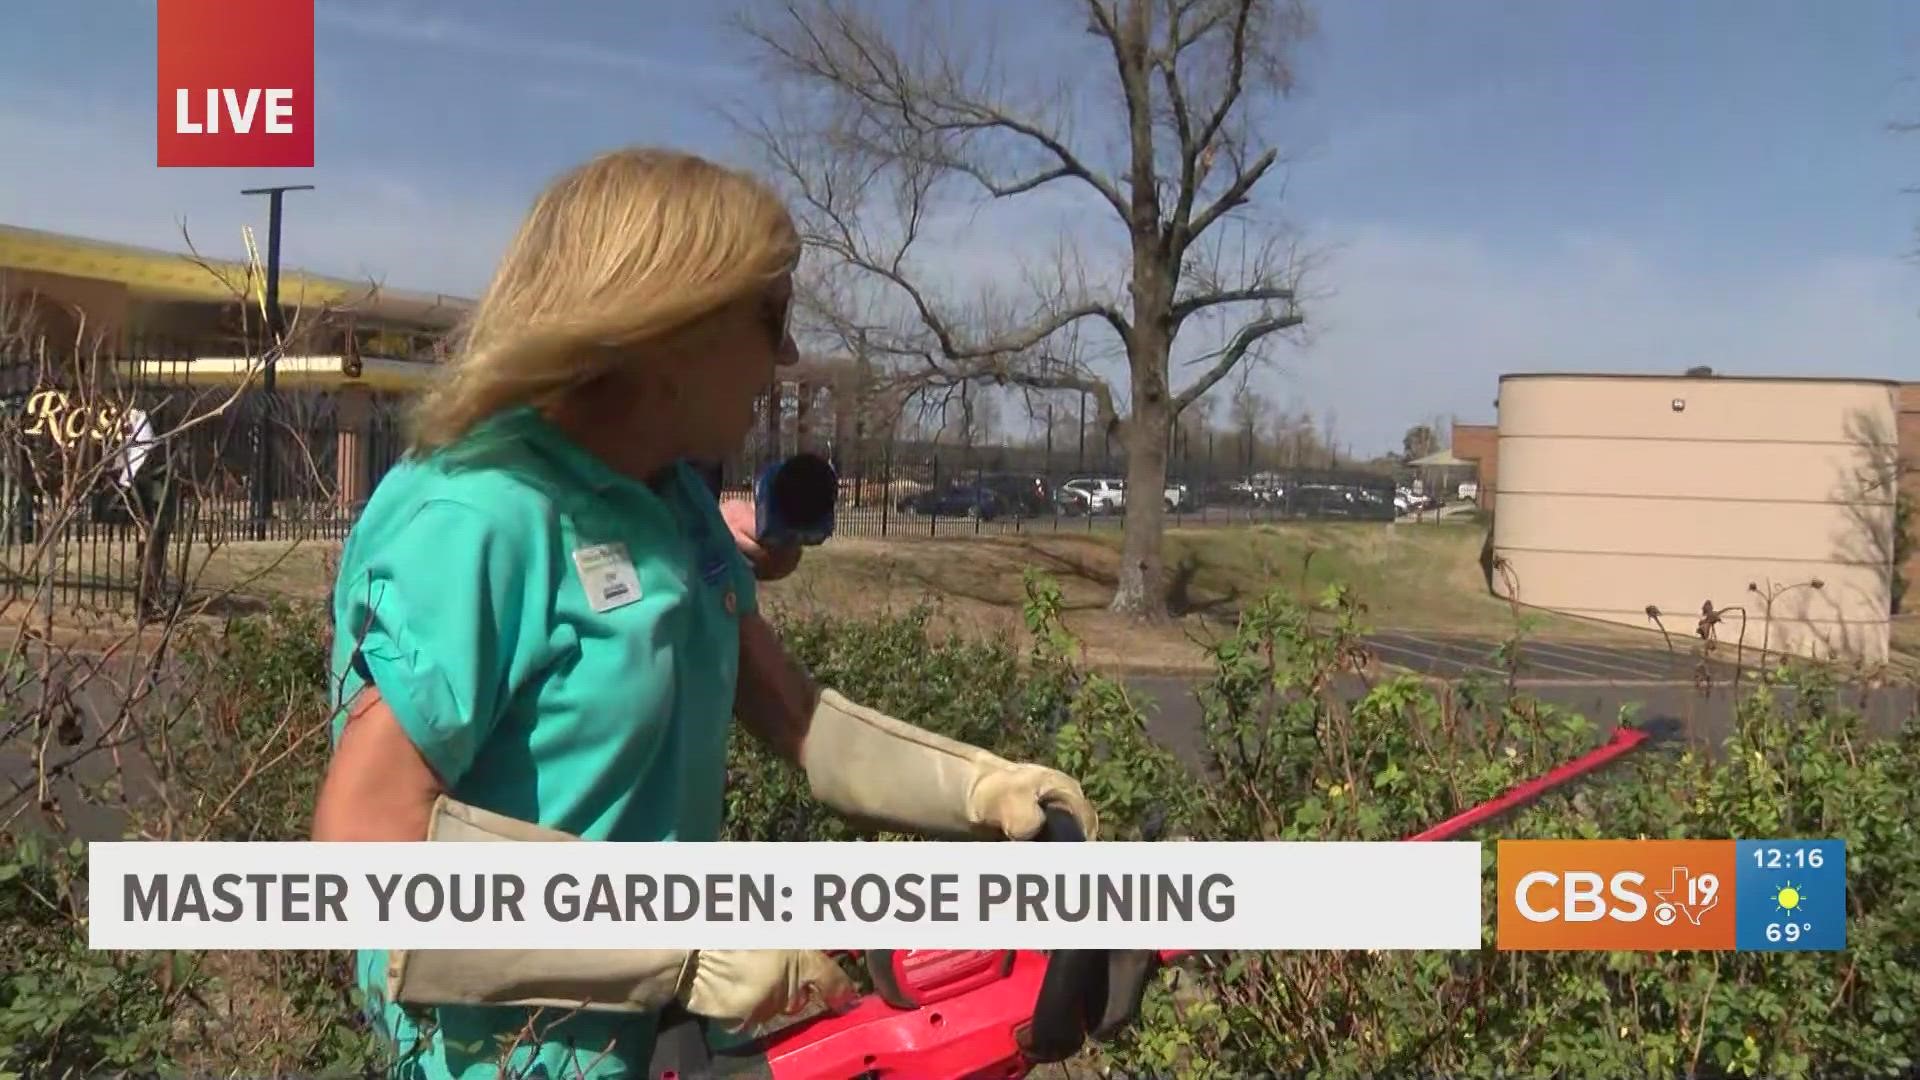 In this week's edition of Mastering Your Garden, the Smith County Master Gardeners teach us how to properly prune our rose bushes.